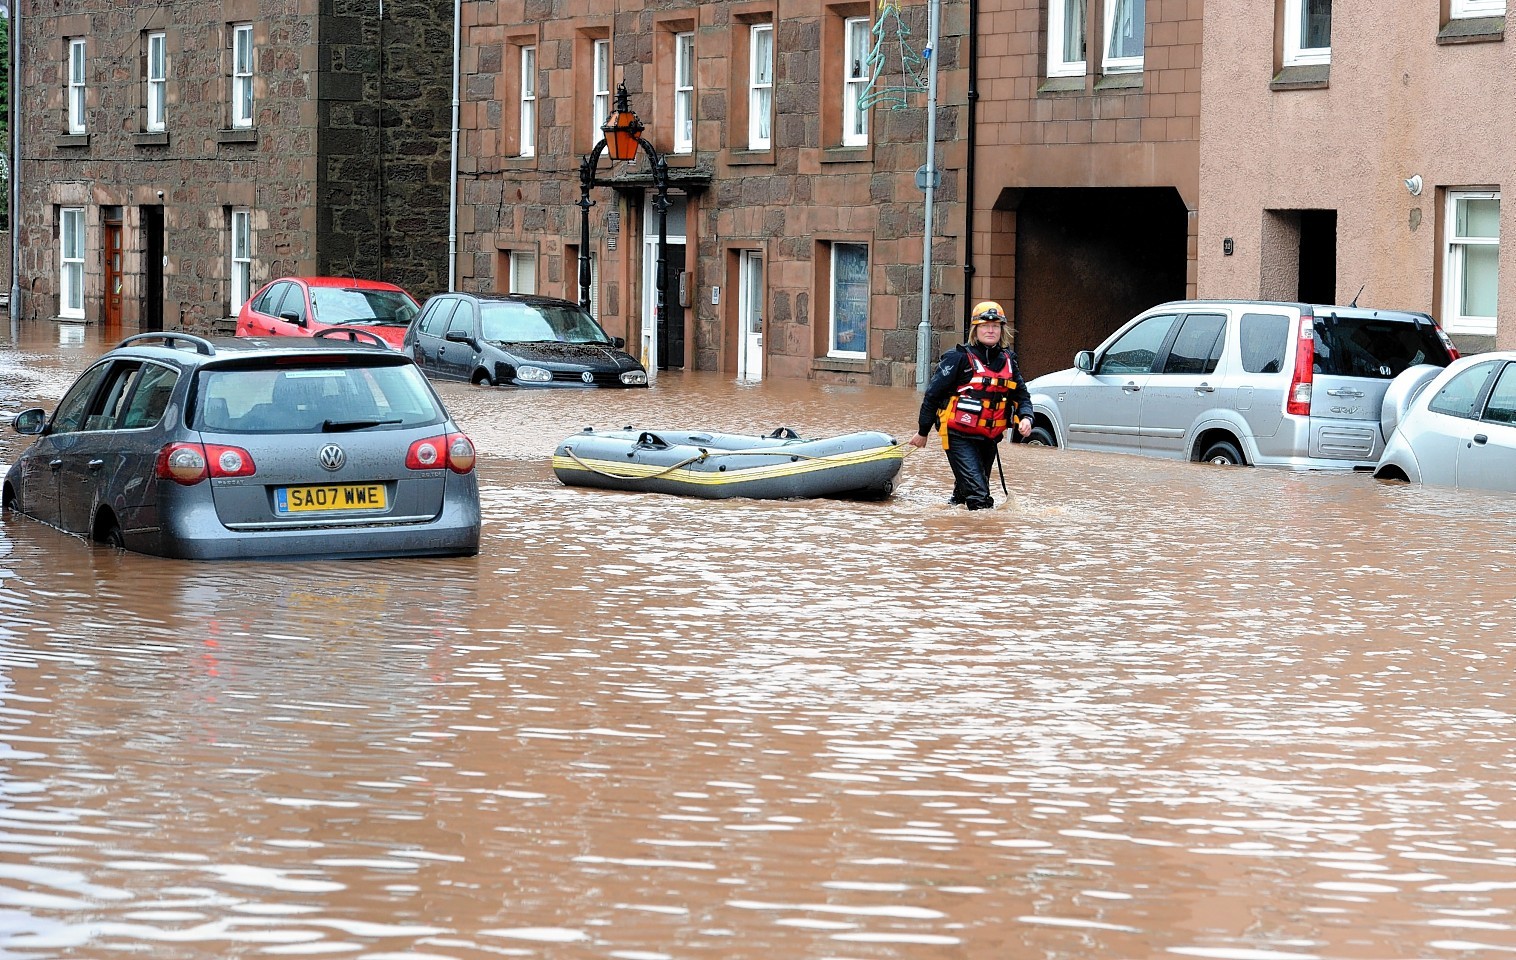 The aftermath of the 2012 floods in Stonehaven